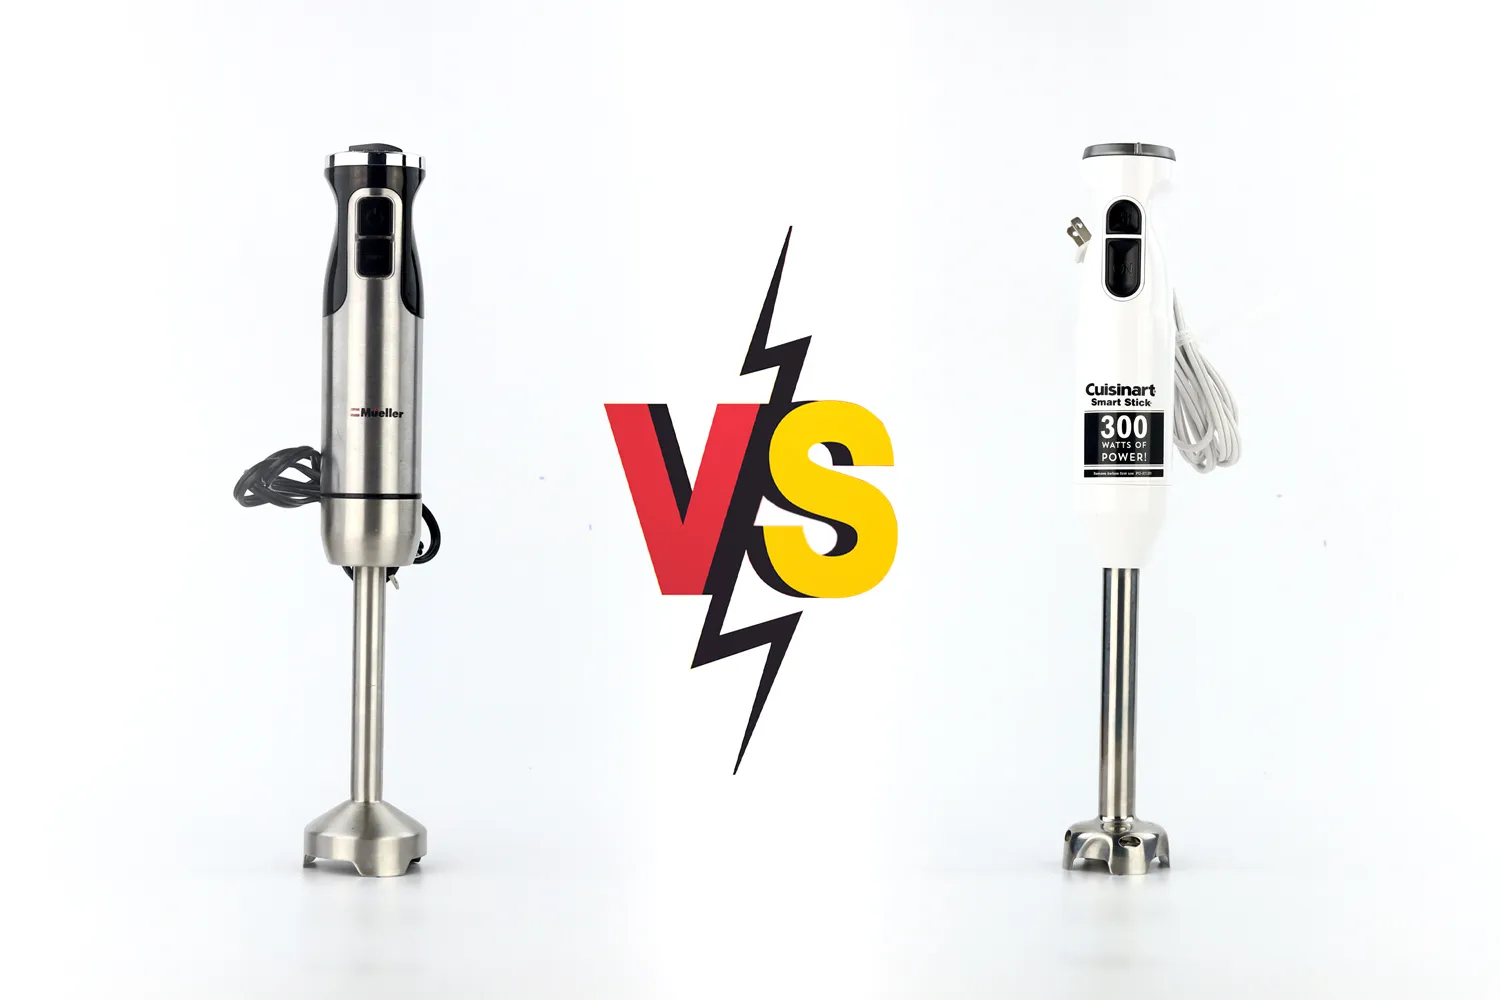 Muller Ultra-Stick vs. Braun MultiQuick-5: Comparing the Differences